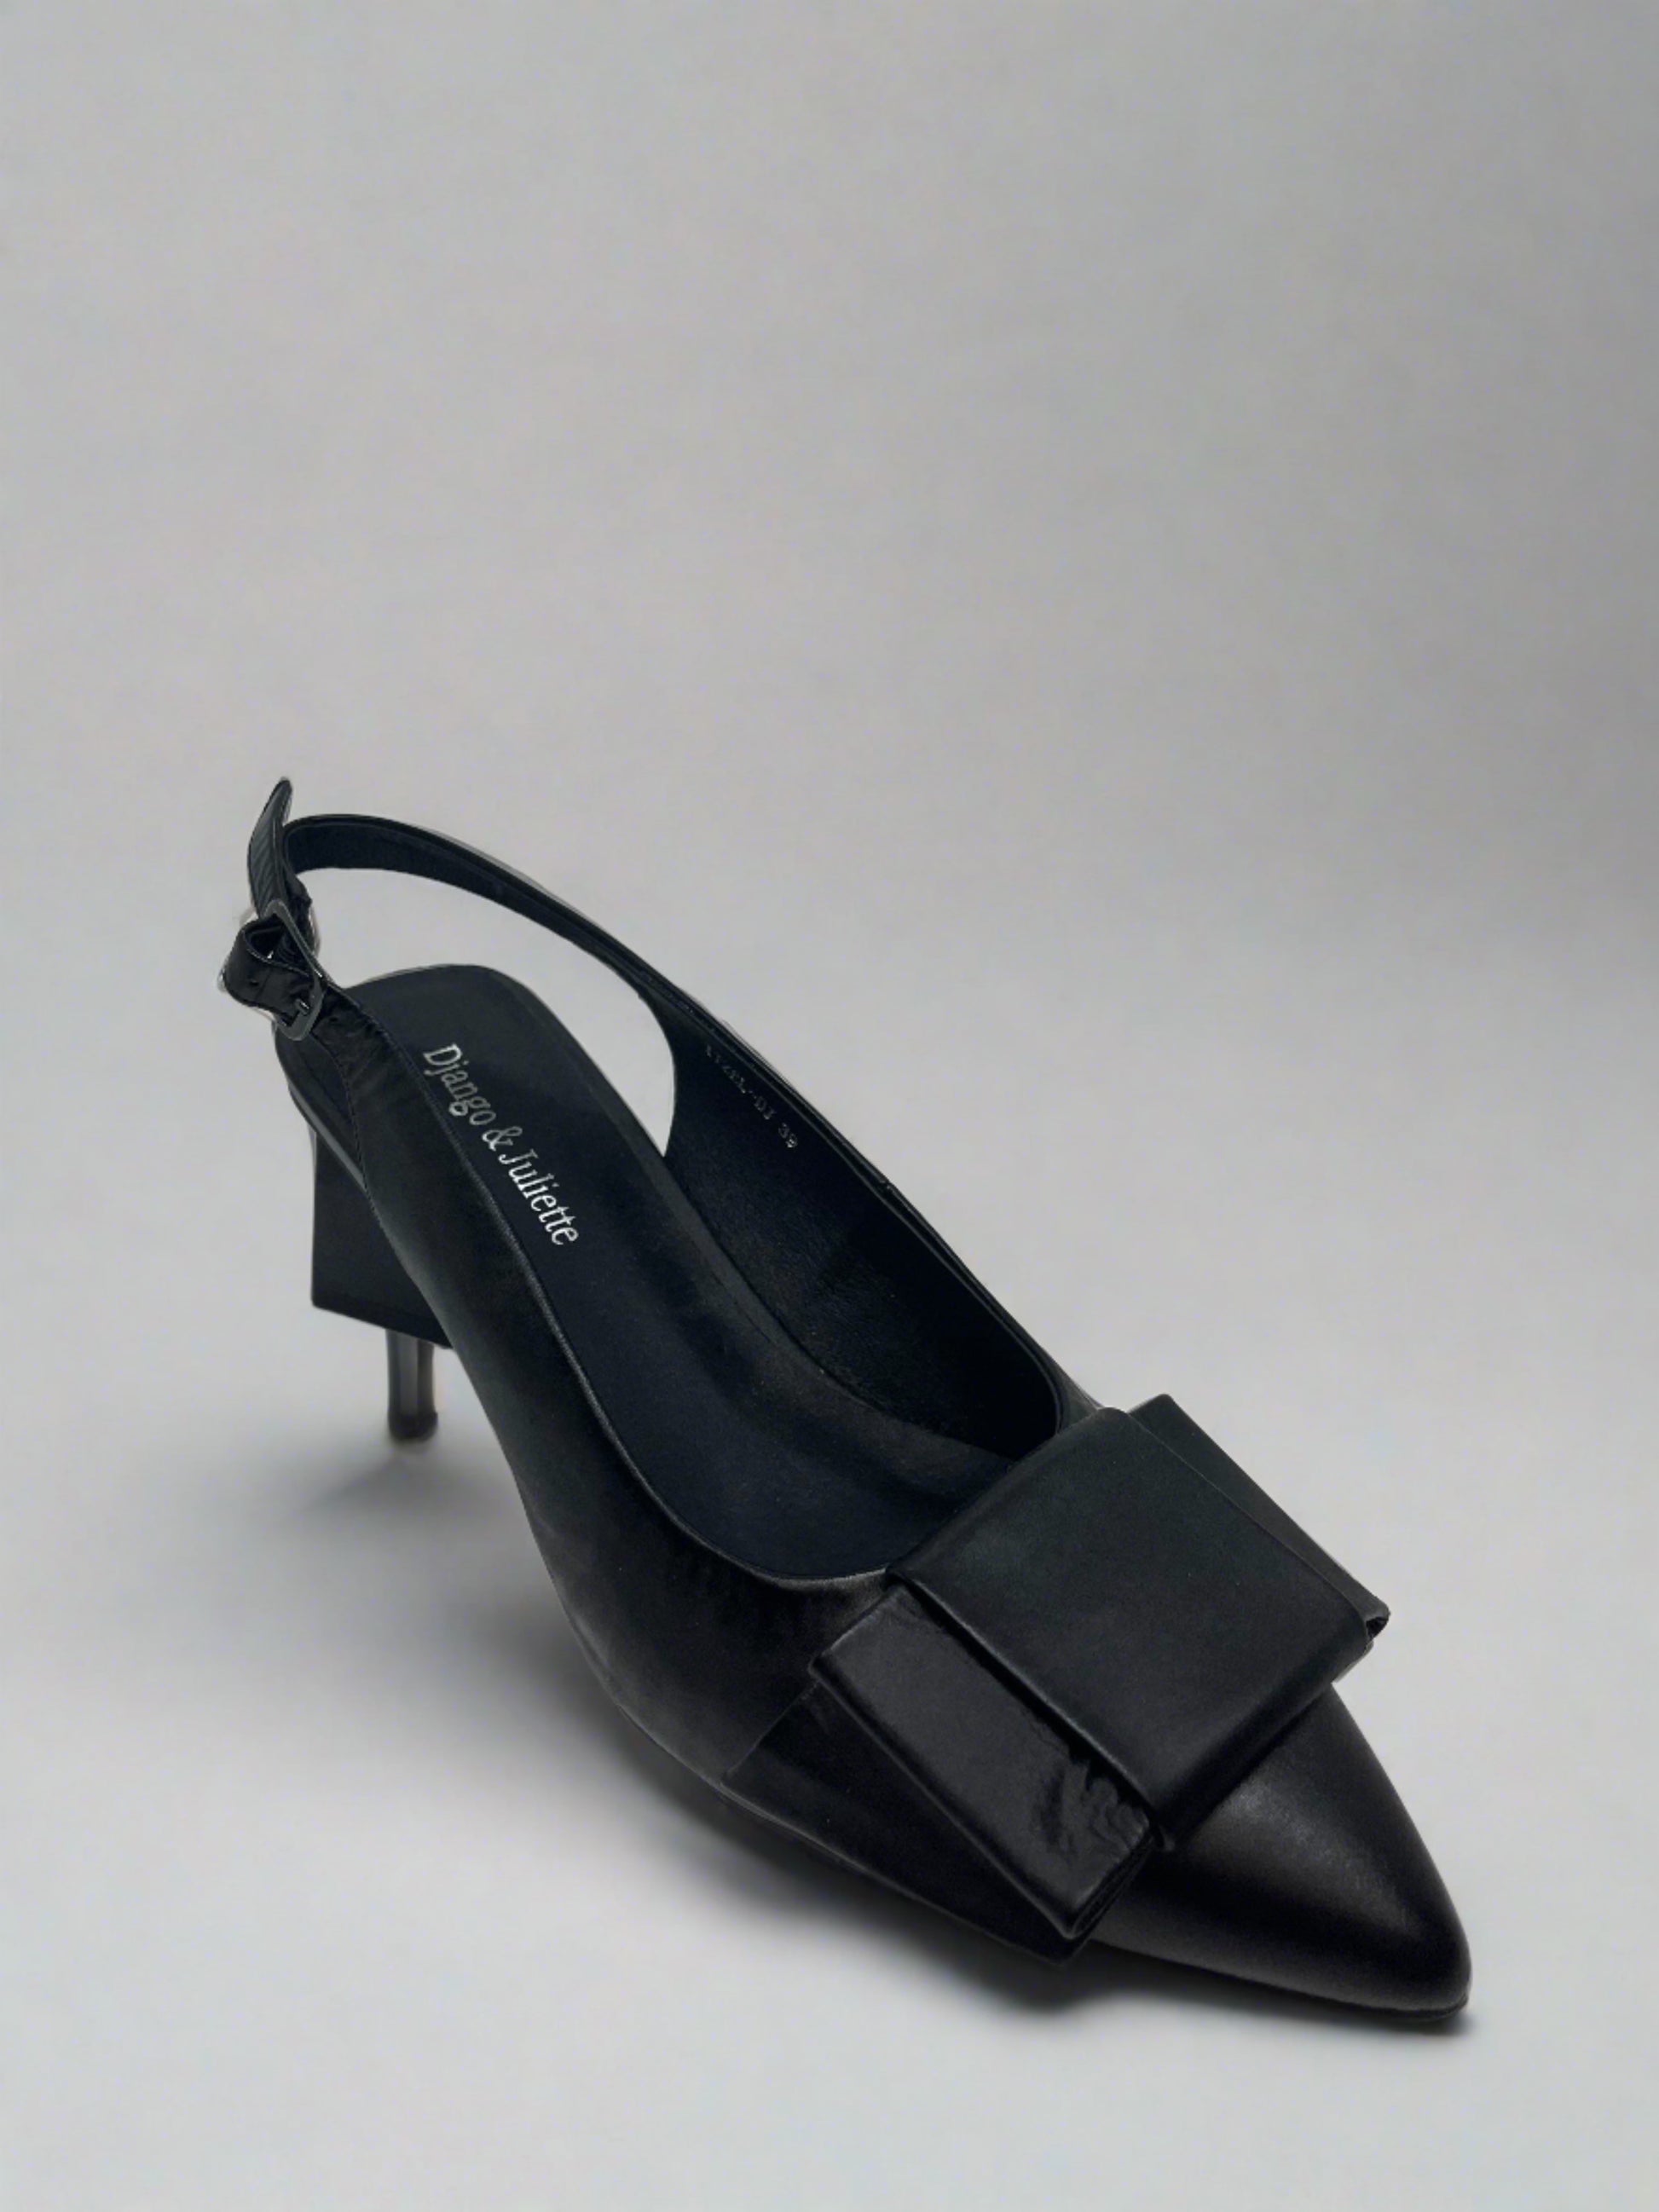 ITZEL SLING BACK - DJANGO AND JULIETTE - 36, 37, 38, 39, 40, 41, 42, black satin, heel with bow, Heels With Bow, red satin, SLING BACK, Sling Back Heels, womens footwear - Stomp Shoes Darwin